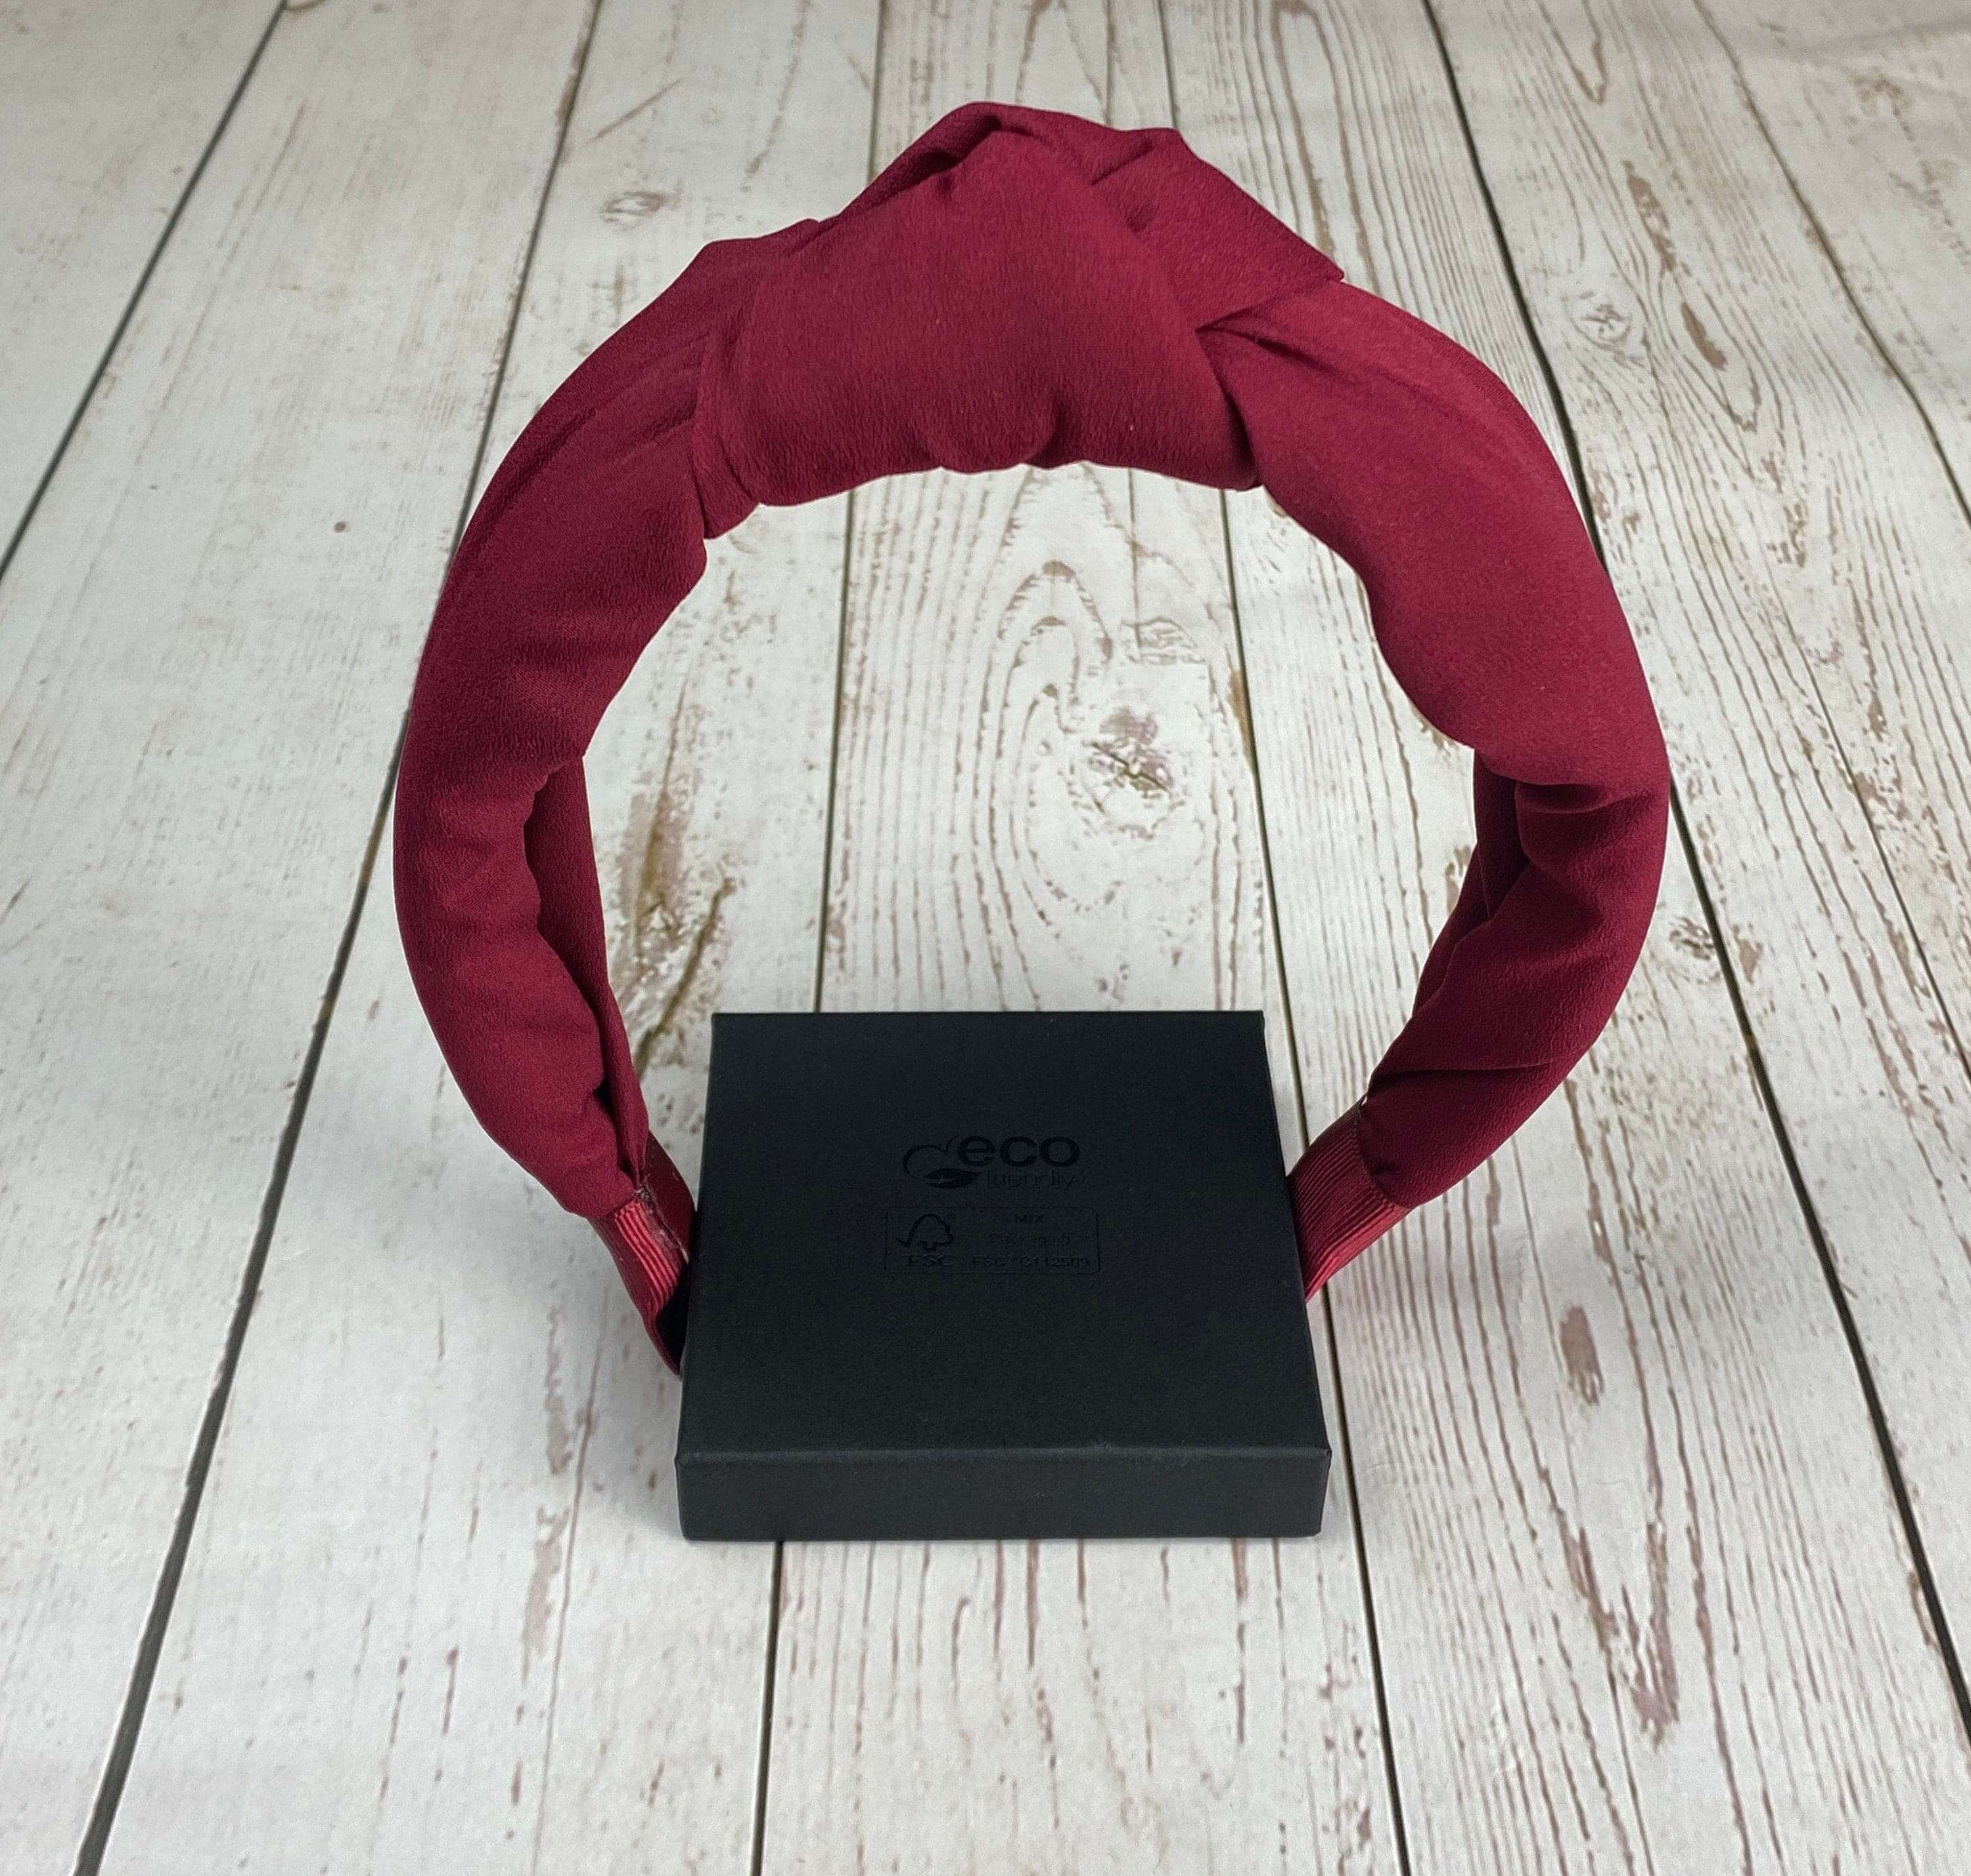 Looking for the perfect summer headband? Look no further than our wide selection of Burgundy Headbands for Women. From Alice bands to wide headbands, we have the perfect style for you!